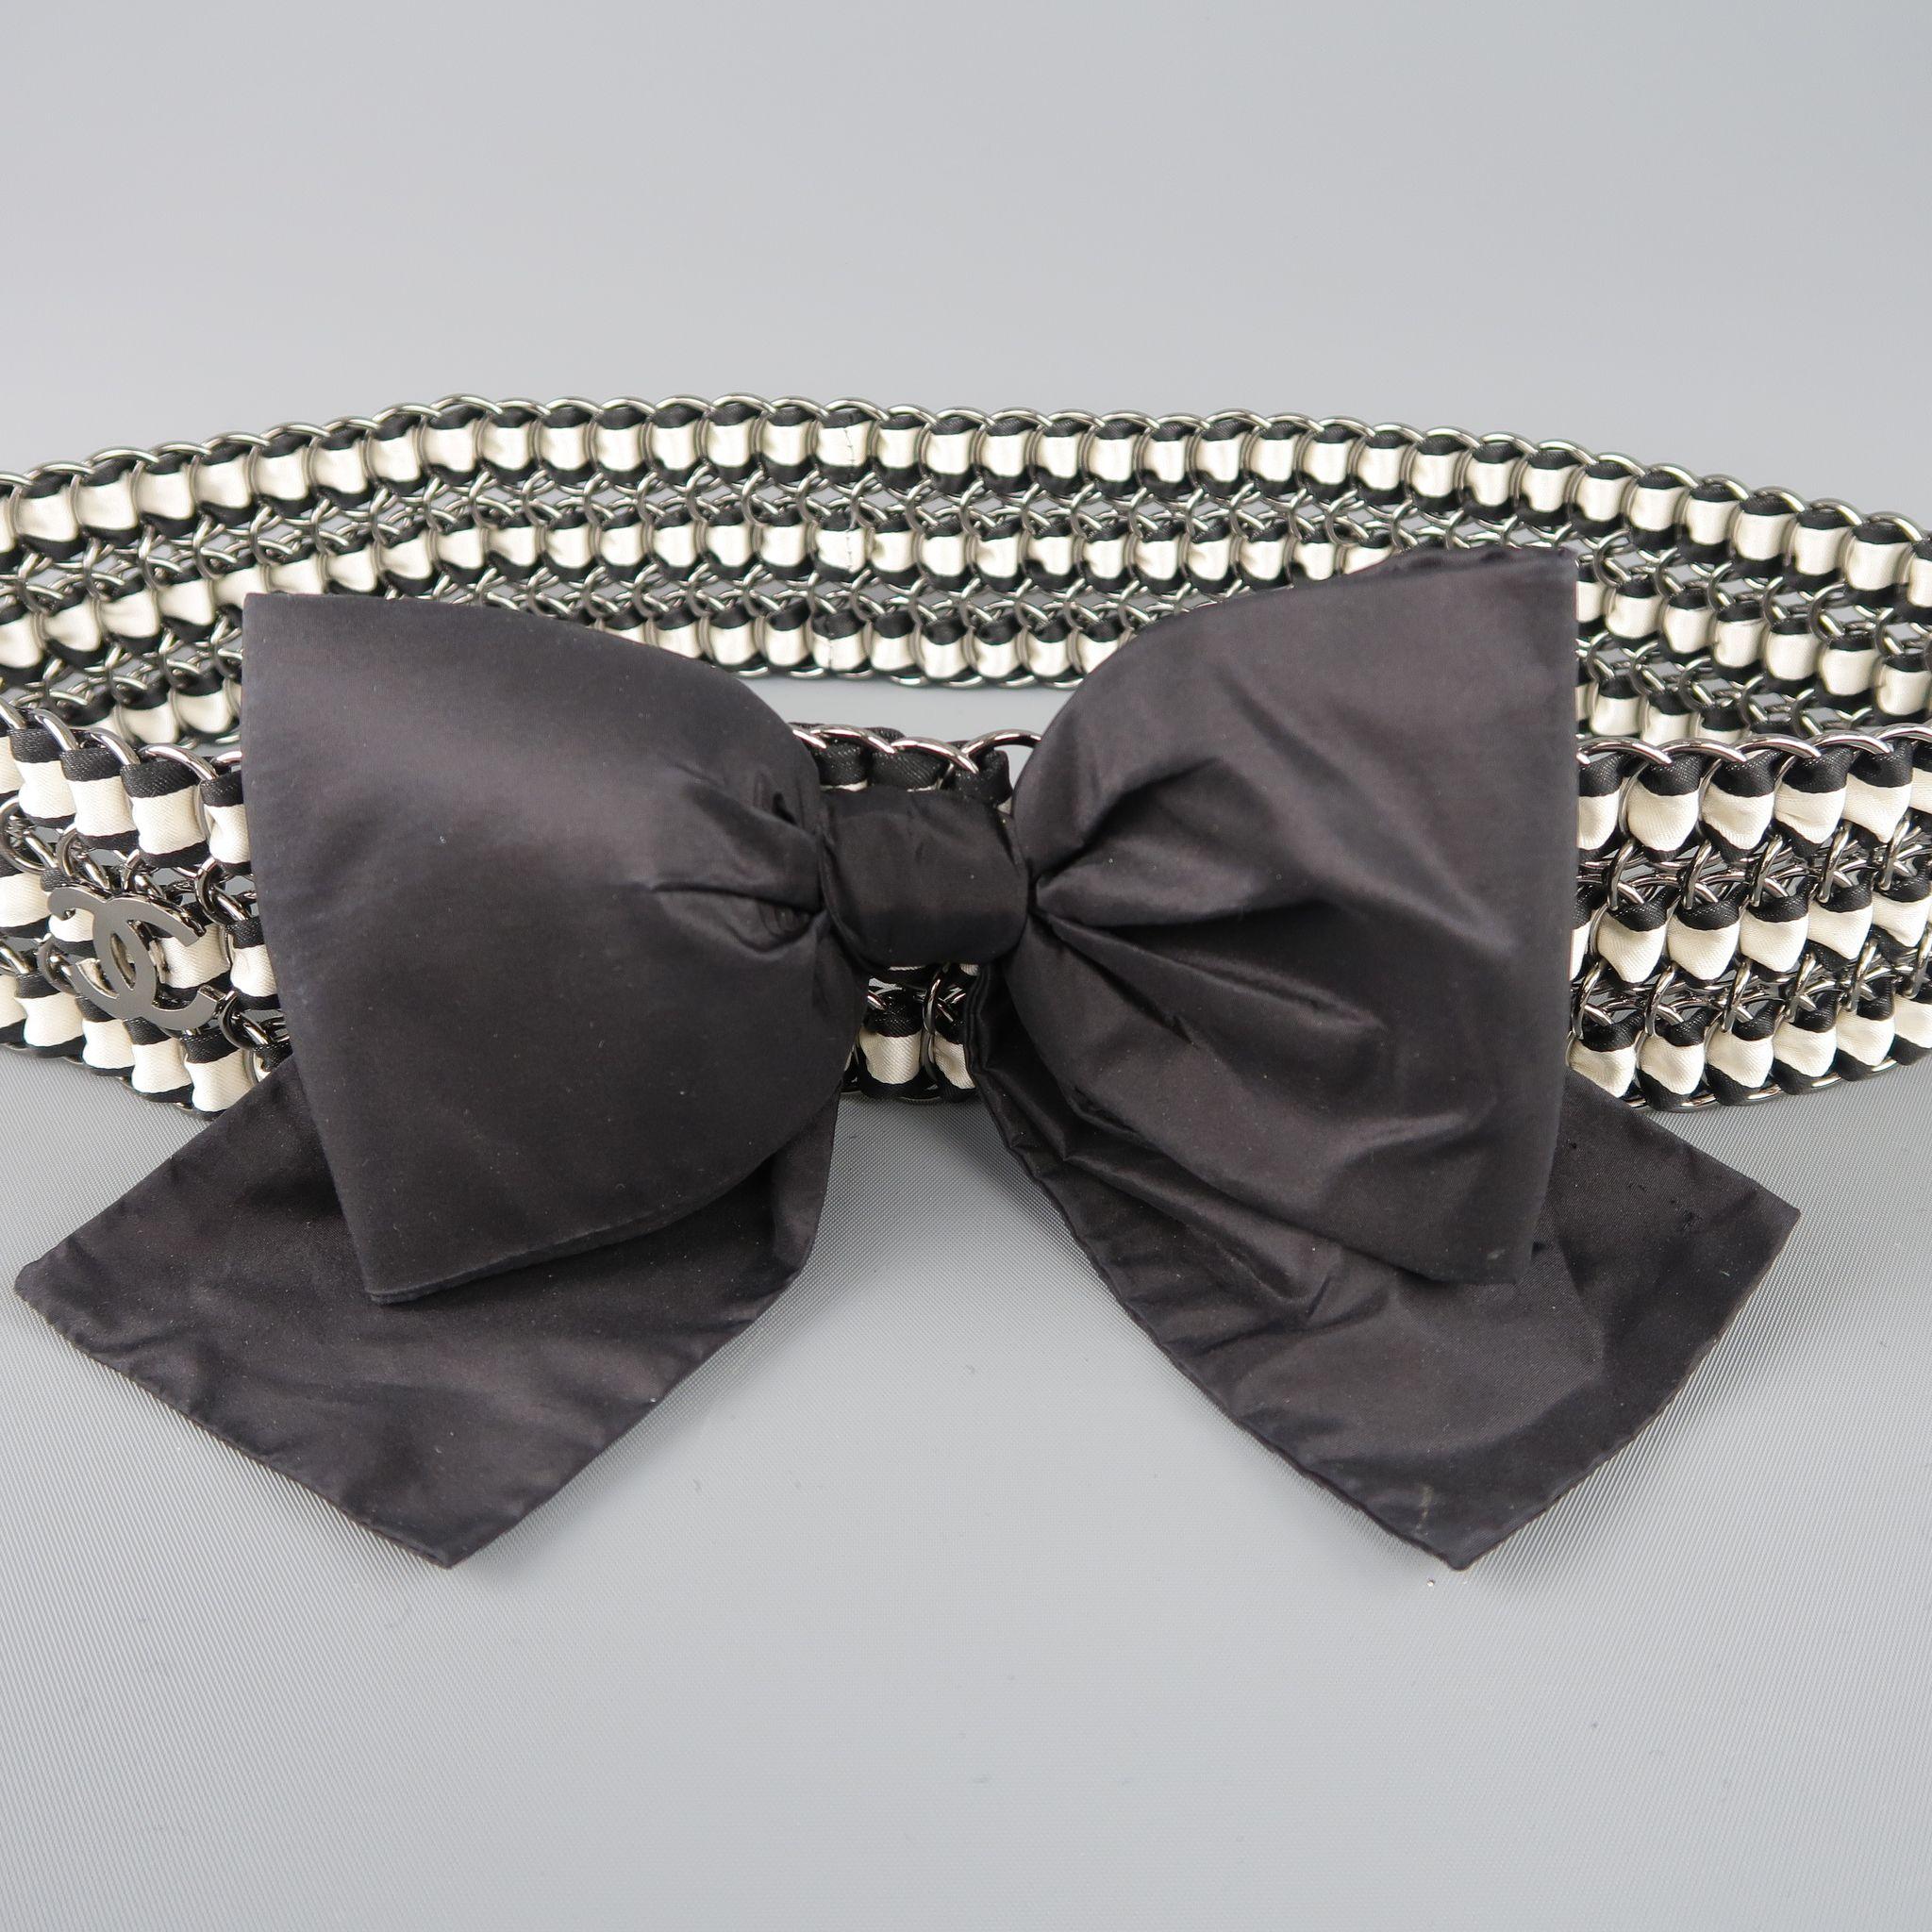 Classic CHANEL Fall Winter 2006 Collection statement  belt features a large, structured taffeta bow on a silver tone loop chainmail band with three black and cream silk ribbons woven through with CC emblem and charms on closure. Minor wear. Made in